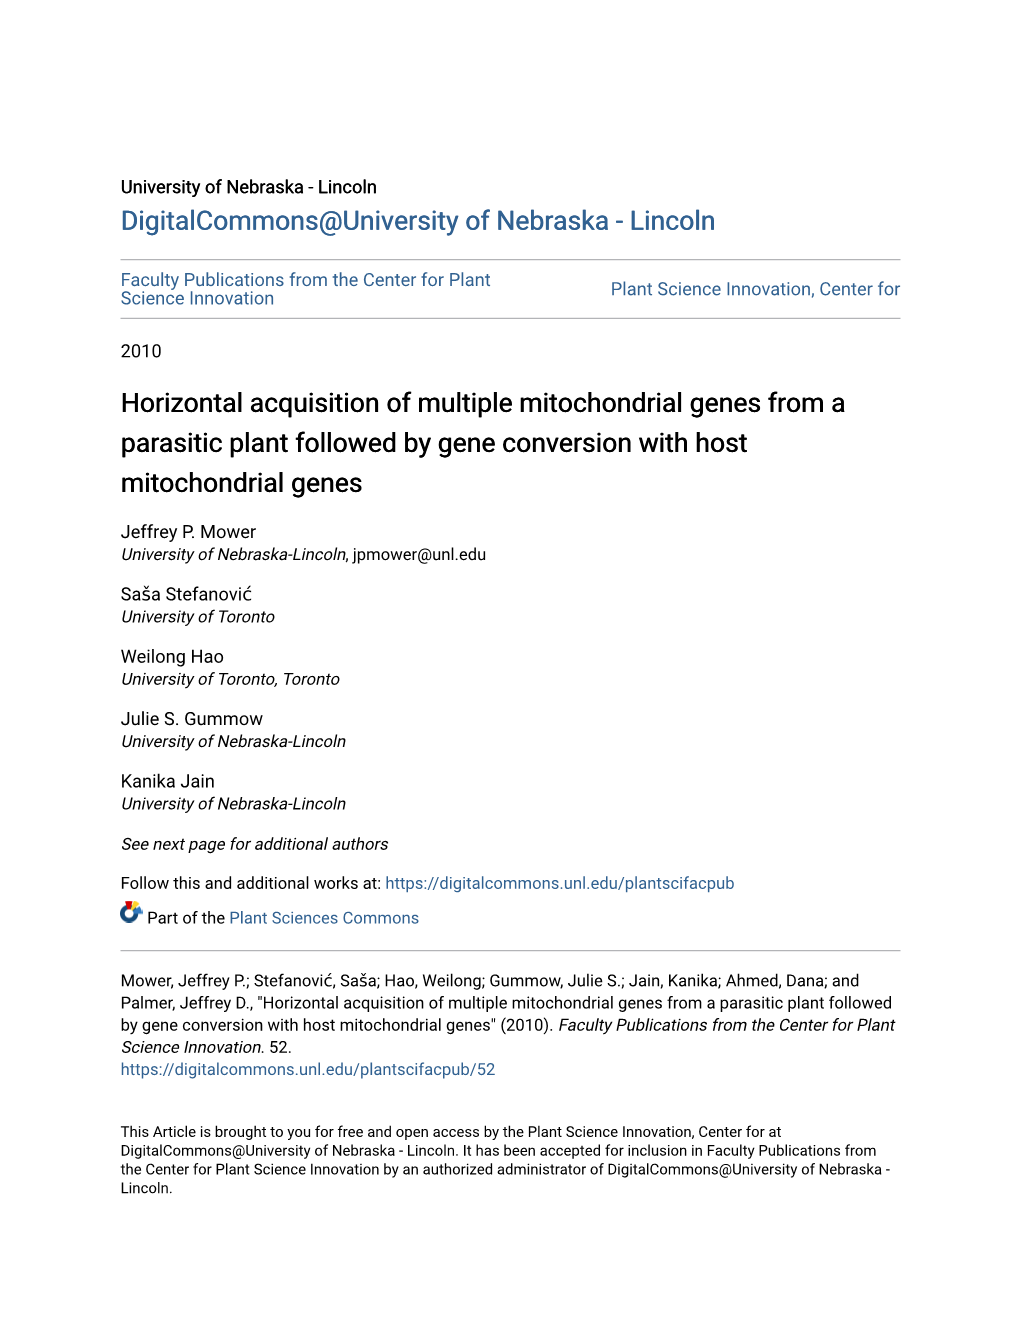 Horizontal Acquisition of Multiple Mitochondrial Genes from a Parasitic Plant Followed by Gene Conversion with Host Mitochondrial Genes